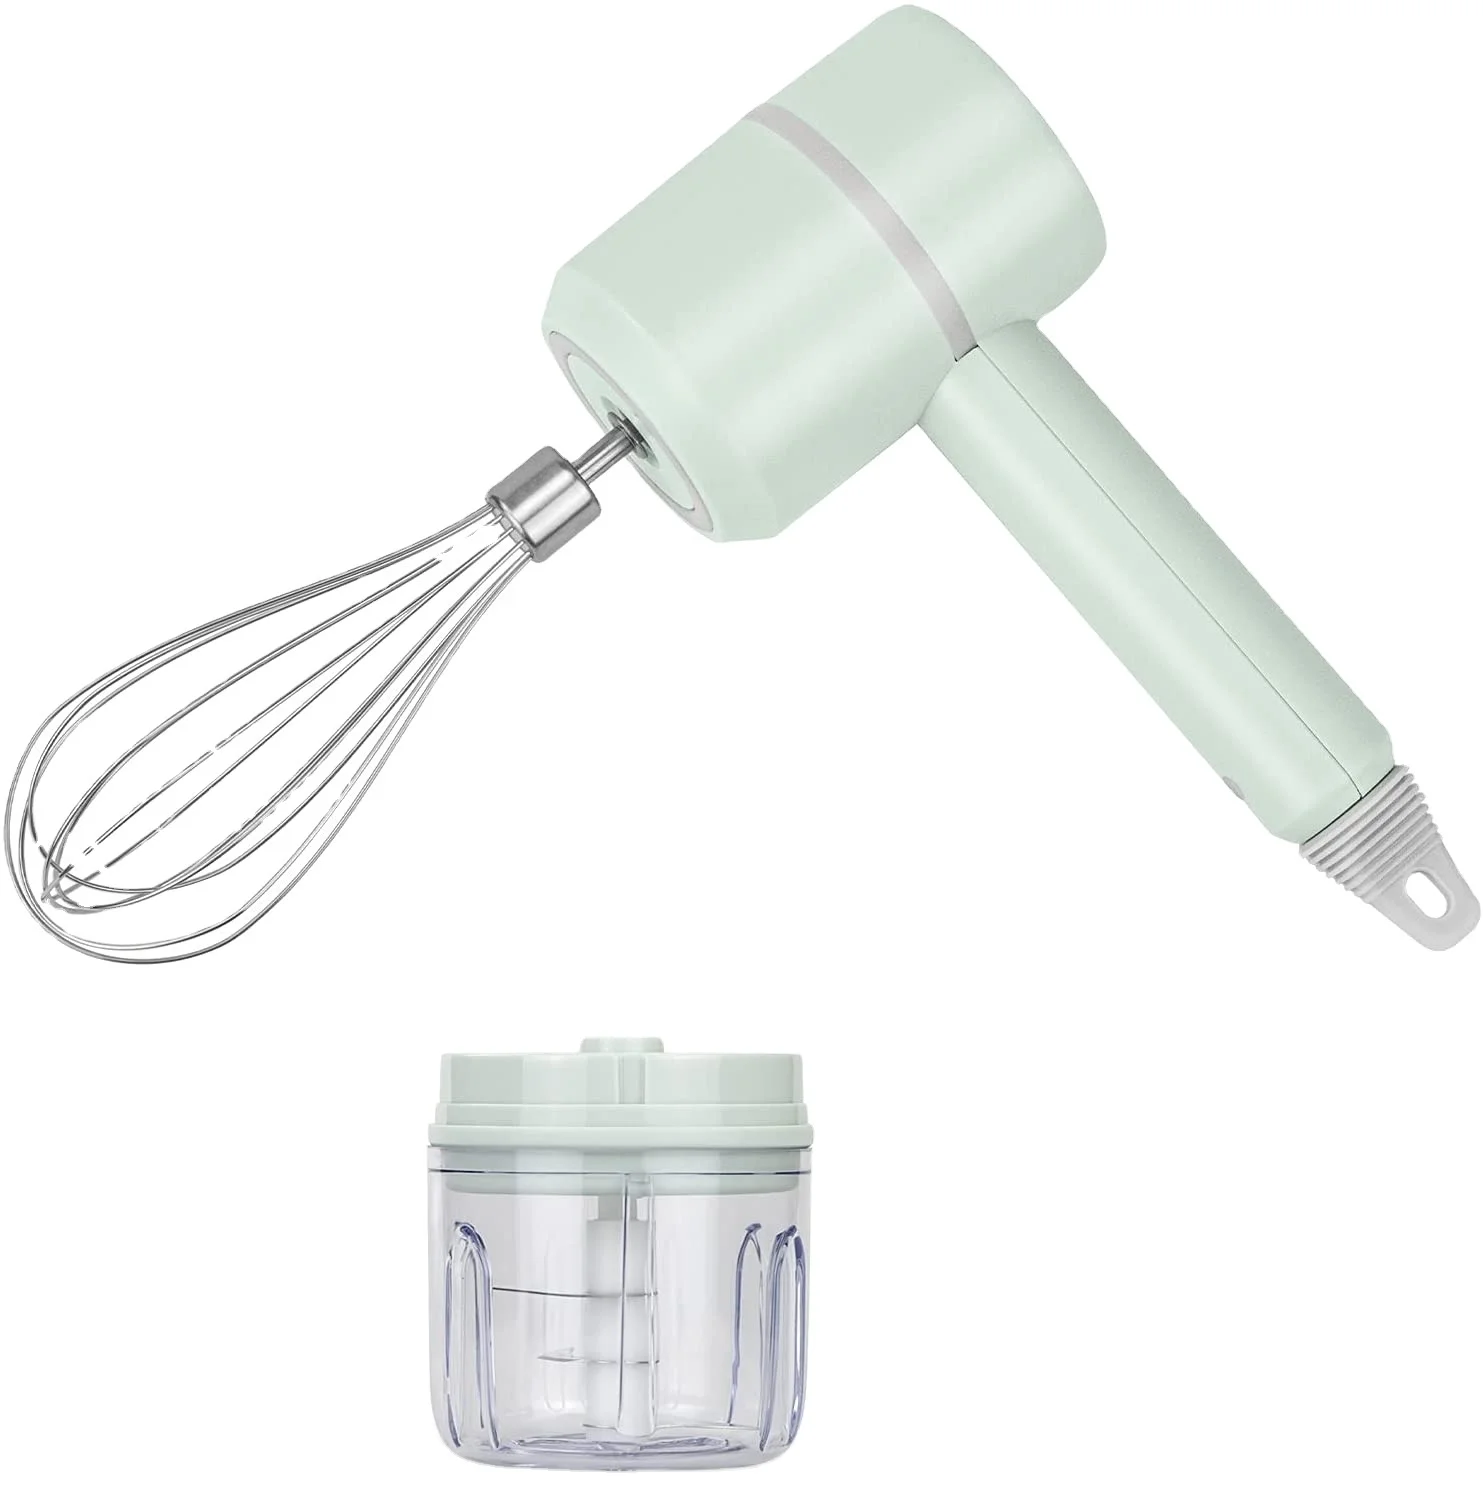 3-in-1 wireless electric hand mixer usb